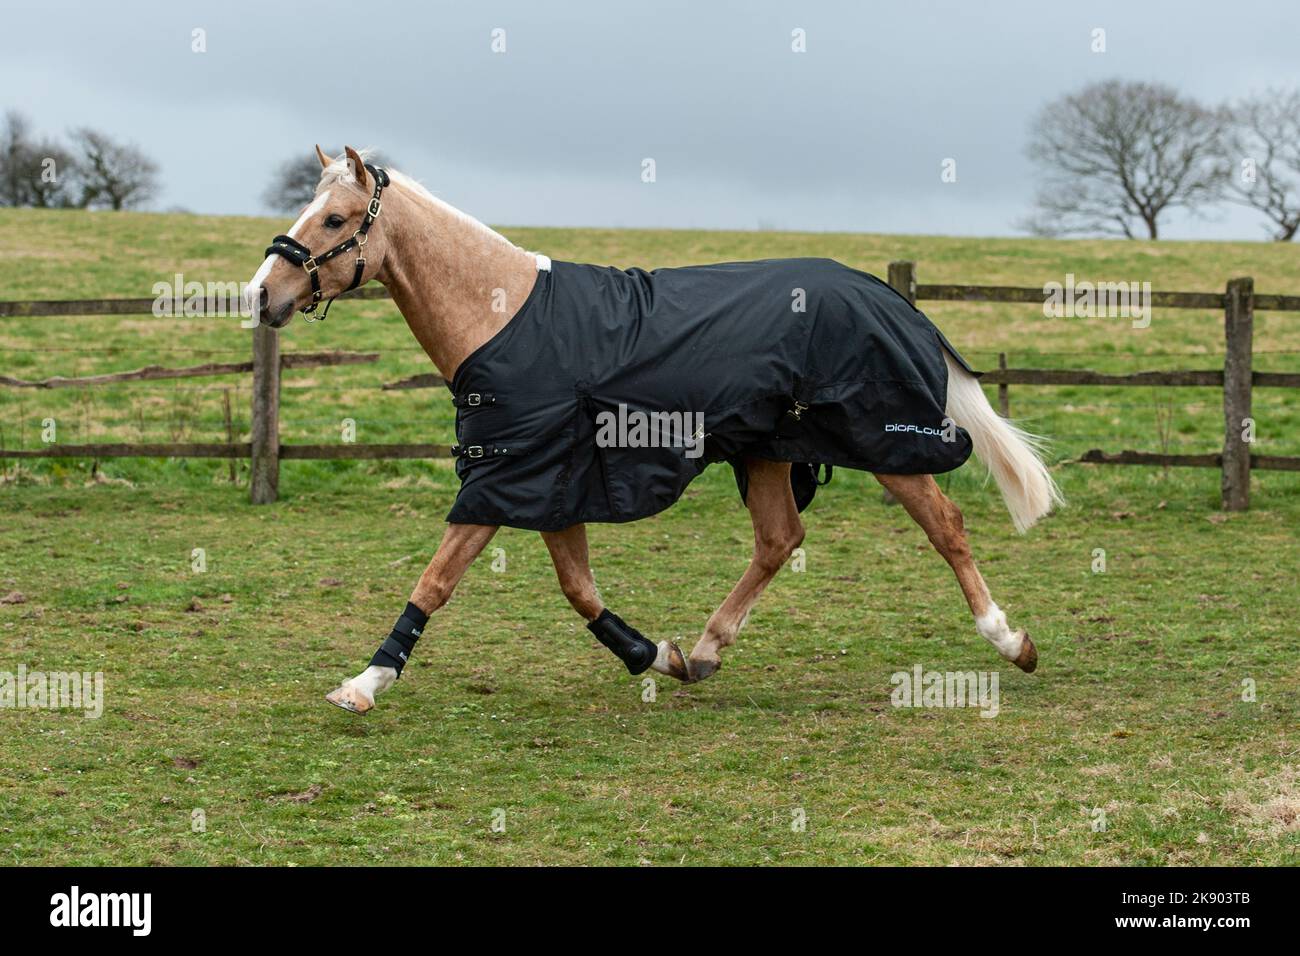 palomino horse wearing a rug in a field Stock Photo